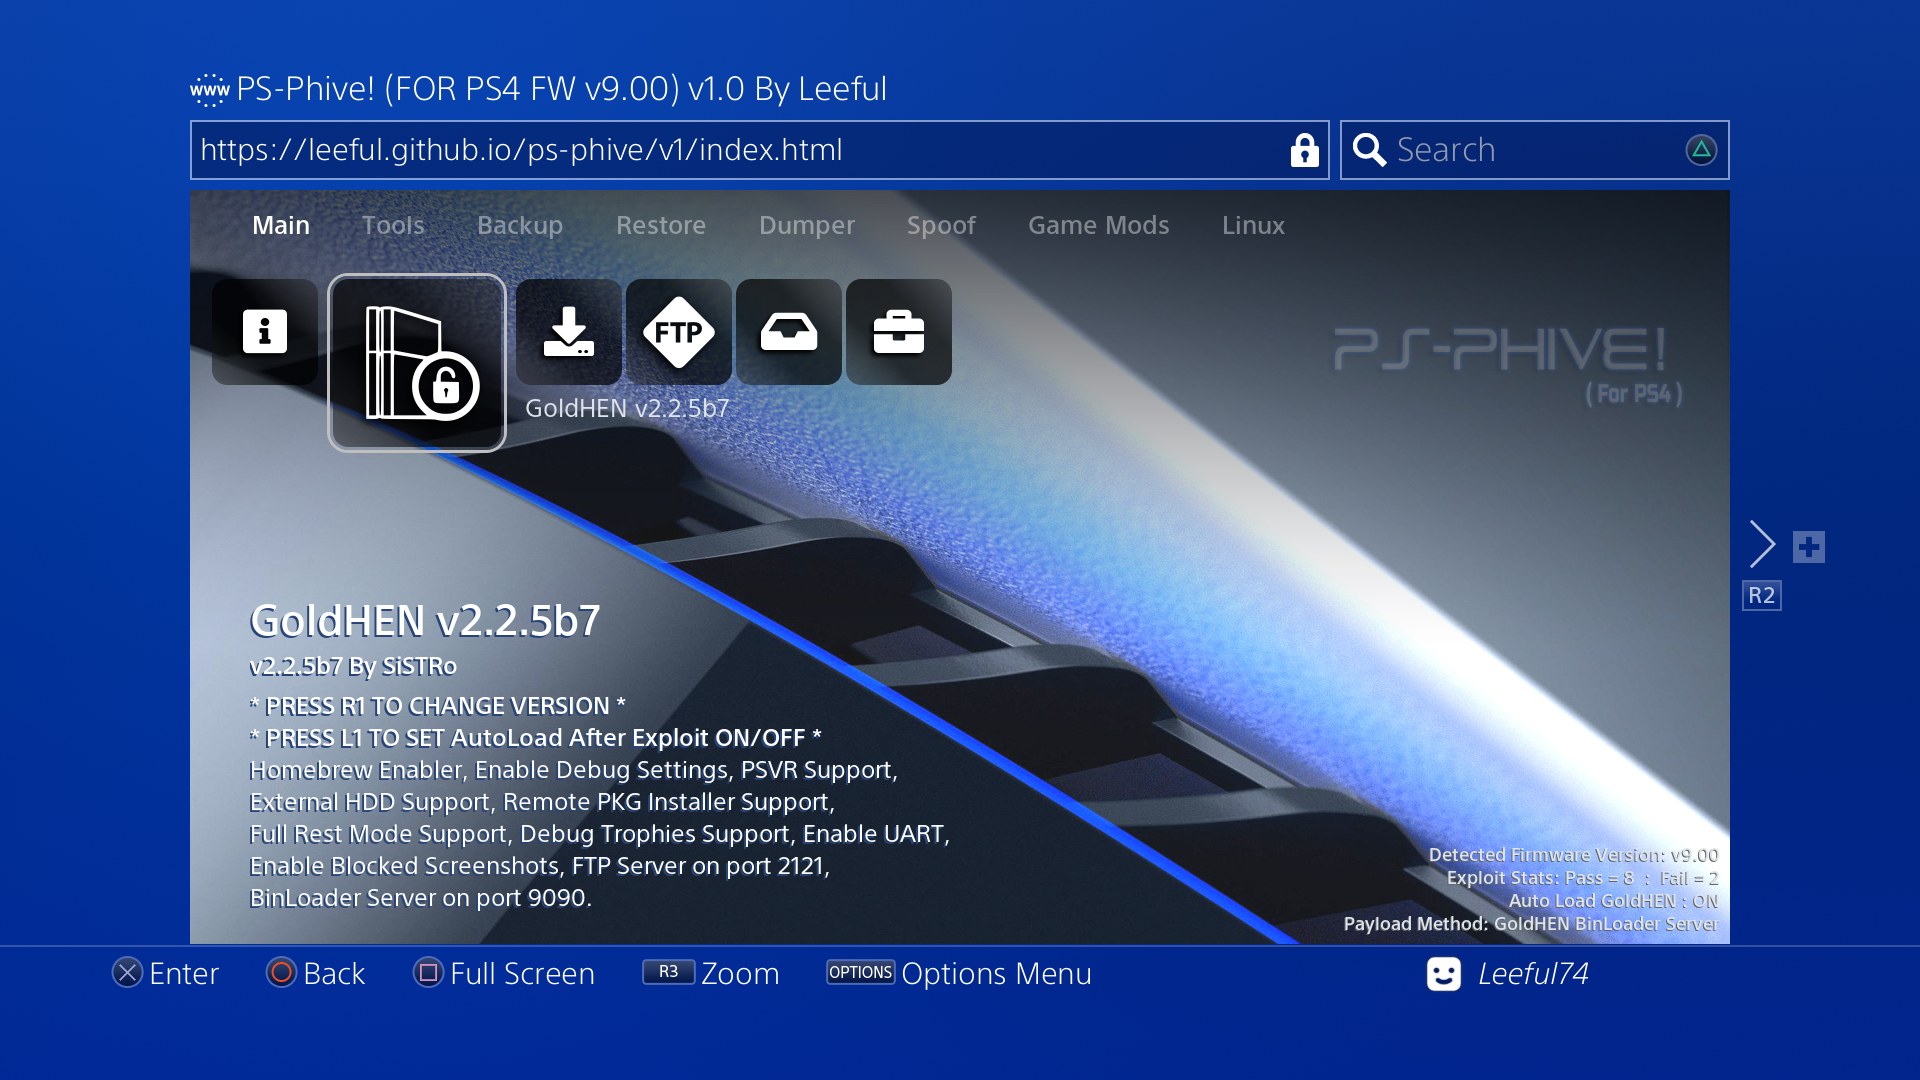 PS4 - [Exploit Host Menu] PS-Phive! (v1.0) by Leeful for PS4 9.00 Firmware  Released | PSX-Place